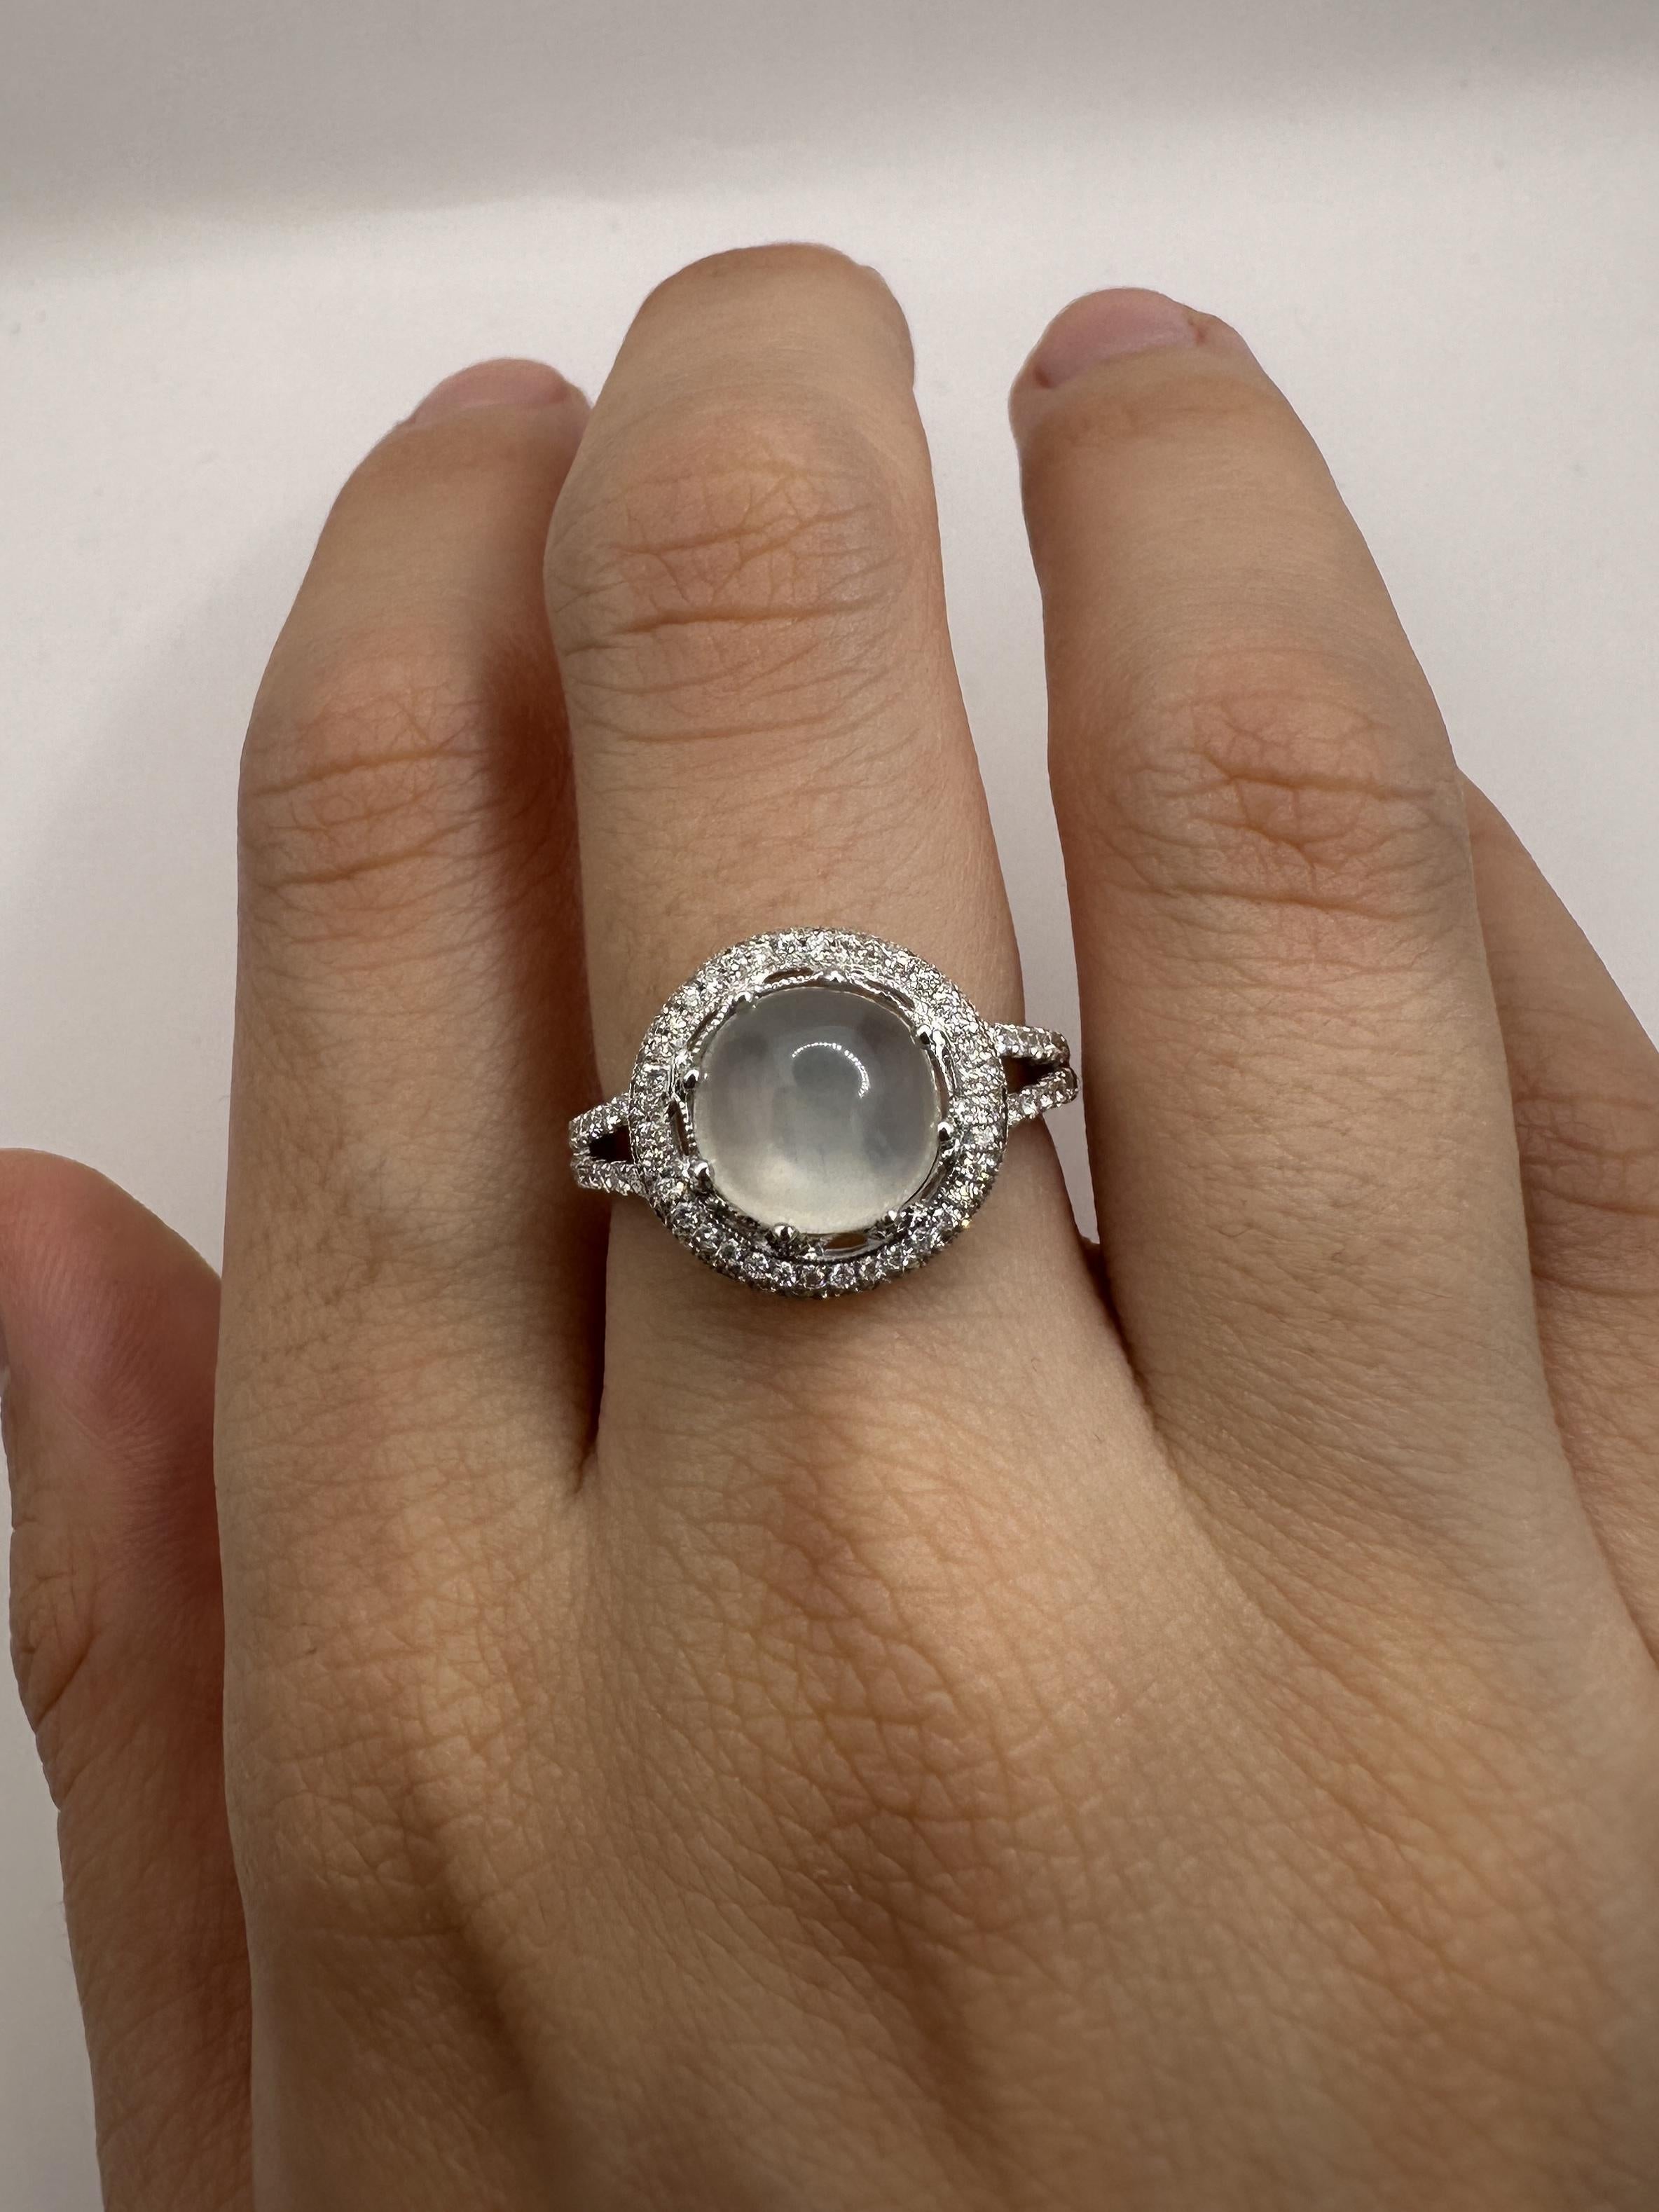 This 18K white gold ring showcases stunning 0.50 carats of diamonds and a mesmerizing 3.24 carat moonstone center. In good condition with only minor surface wear, this ring is sure to add a touch of elegance and sparkle to any outfit. With a weight